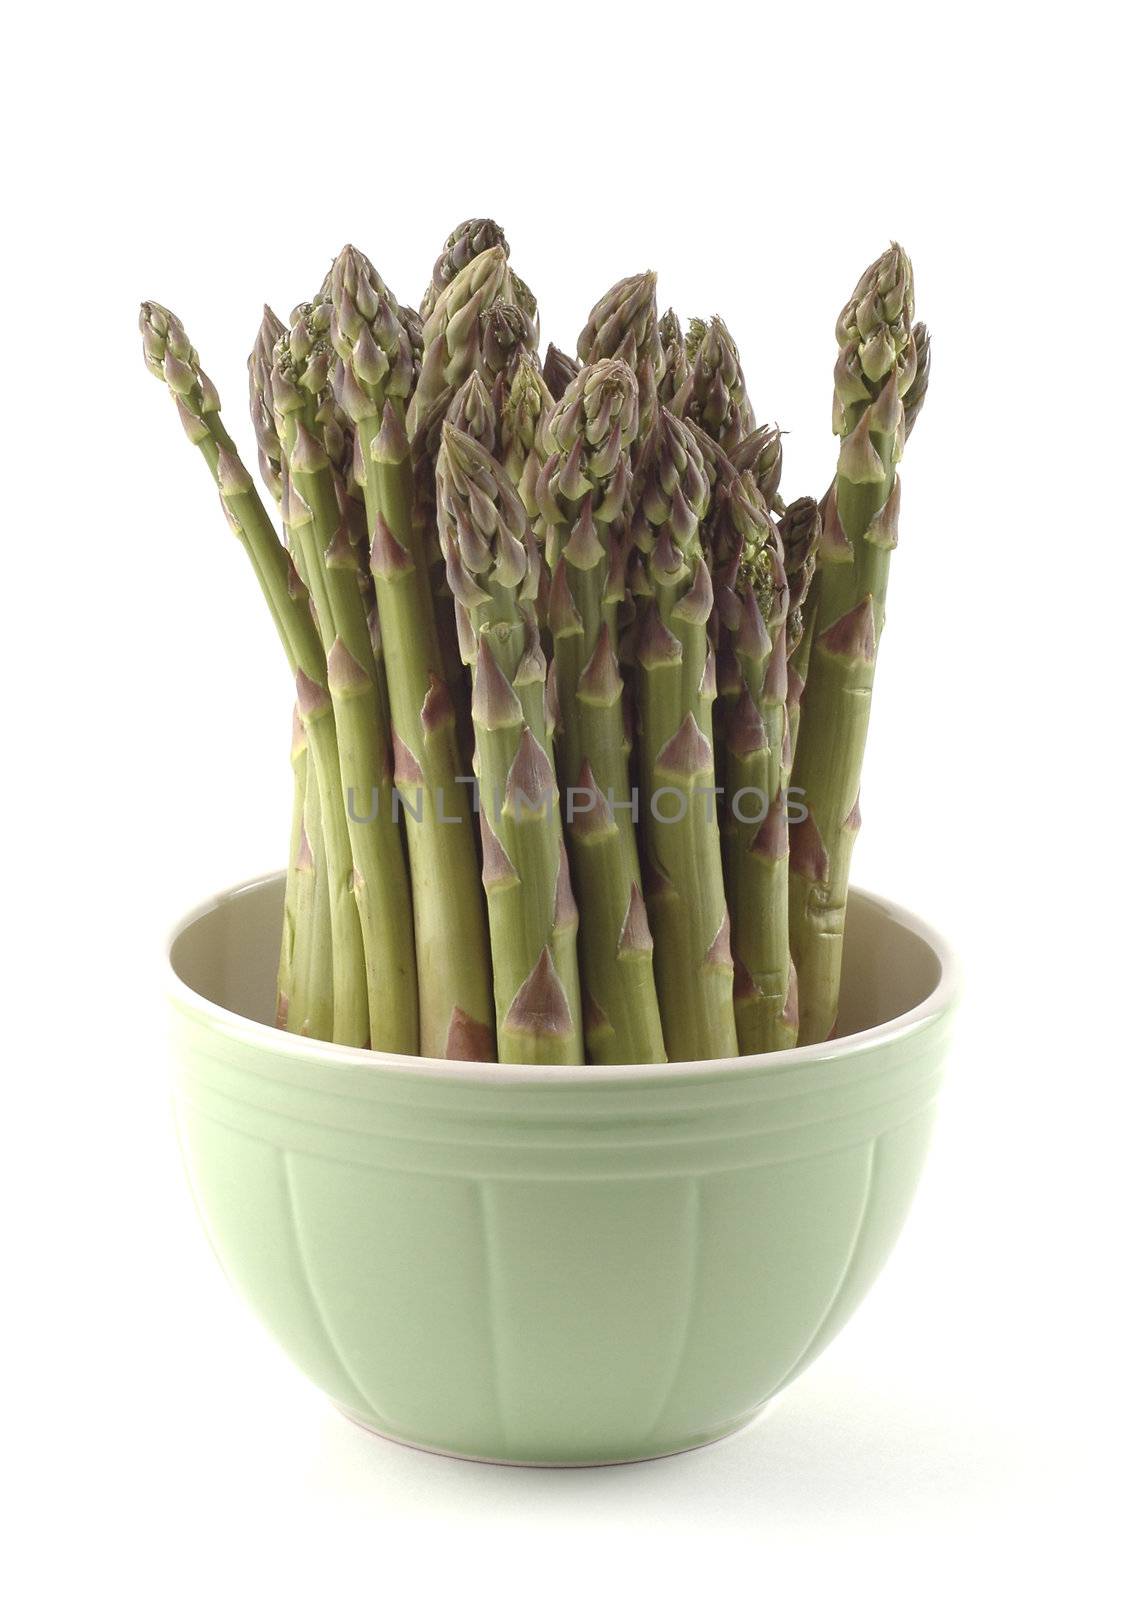 Asparagus by billberryphotography